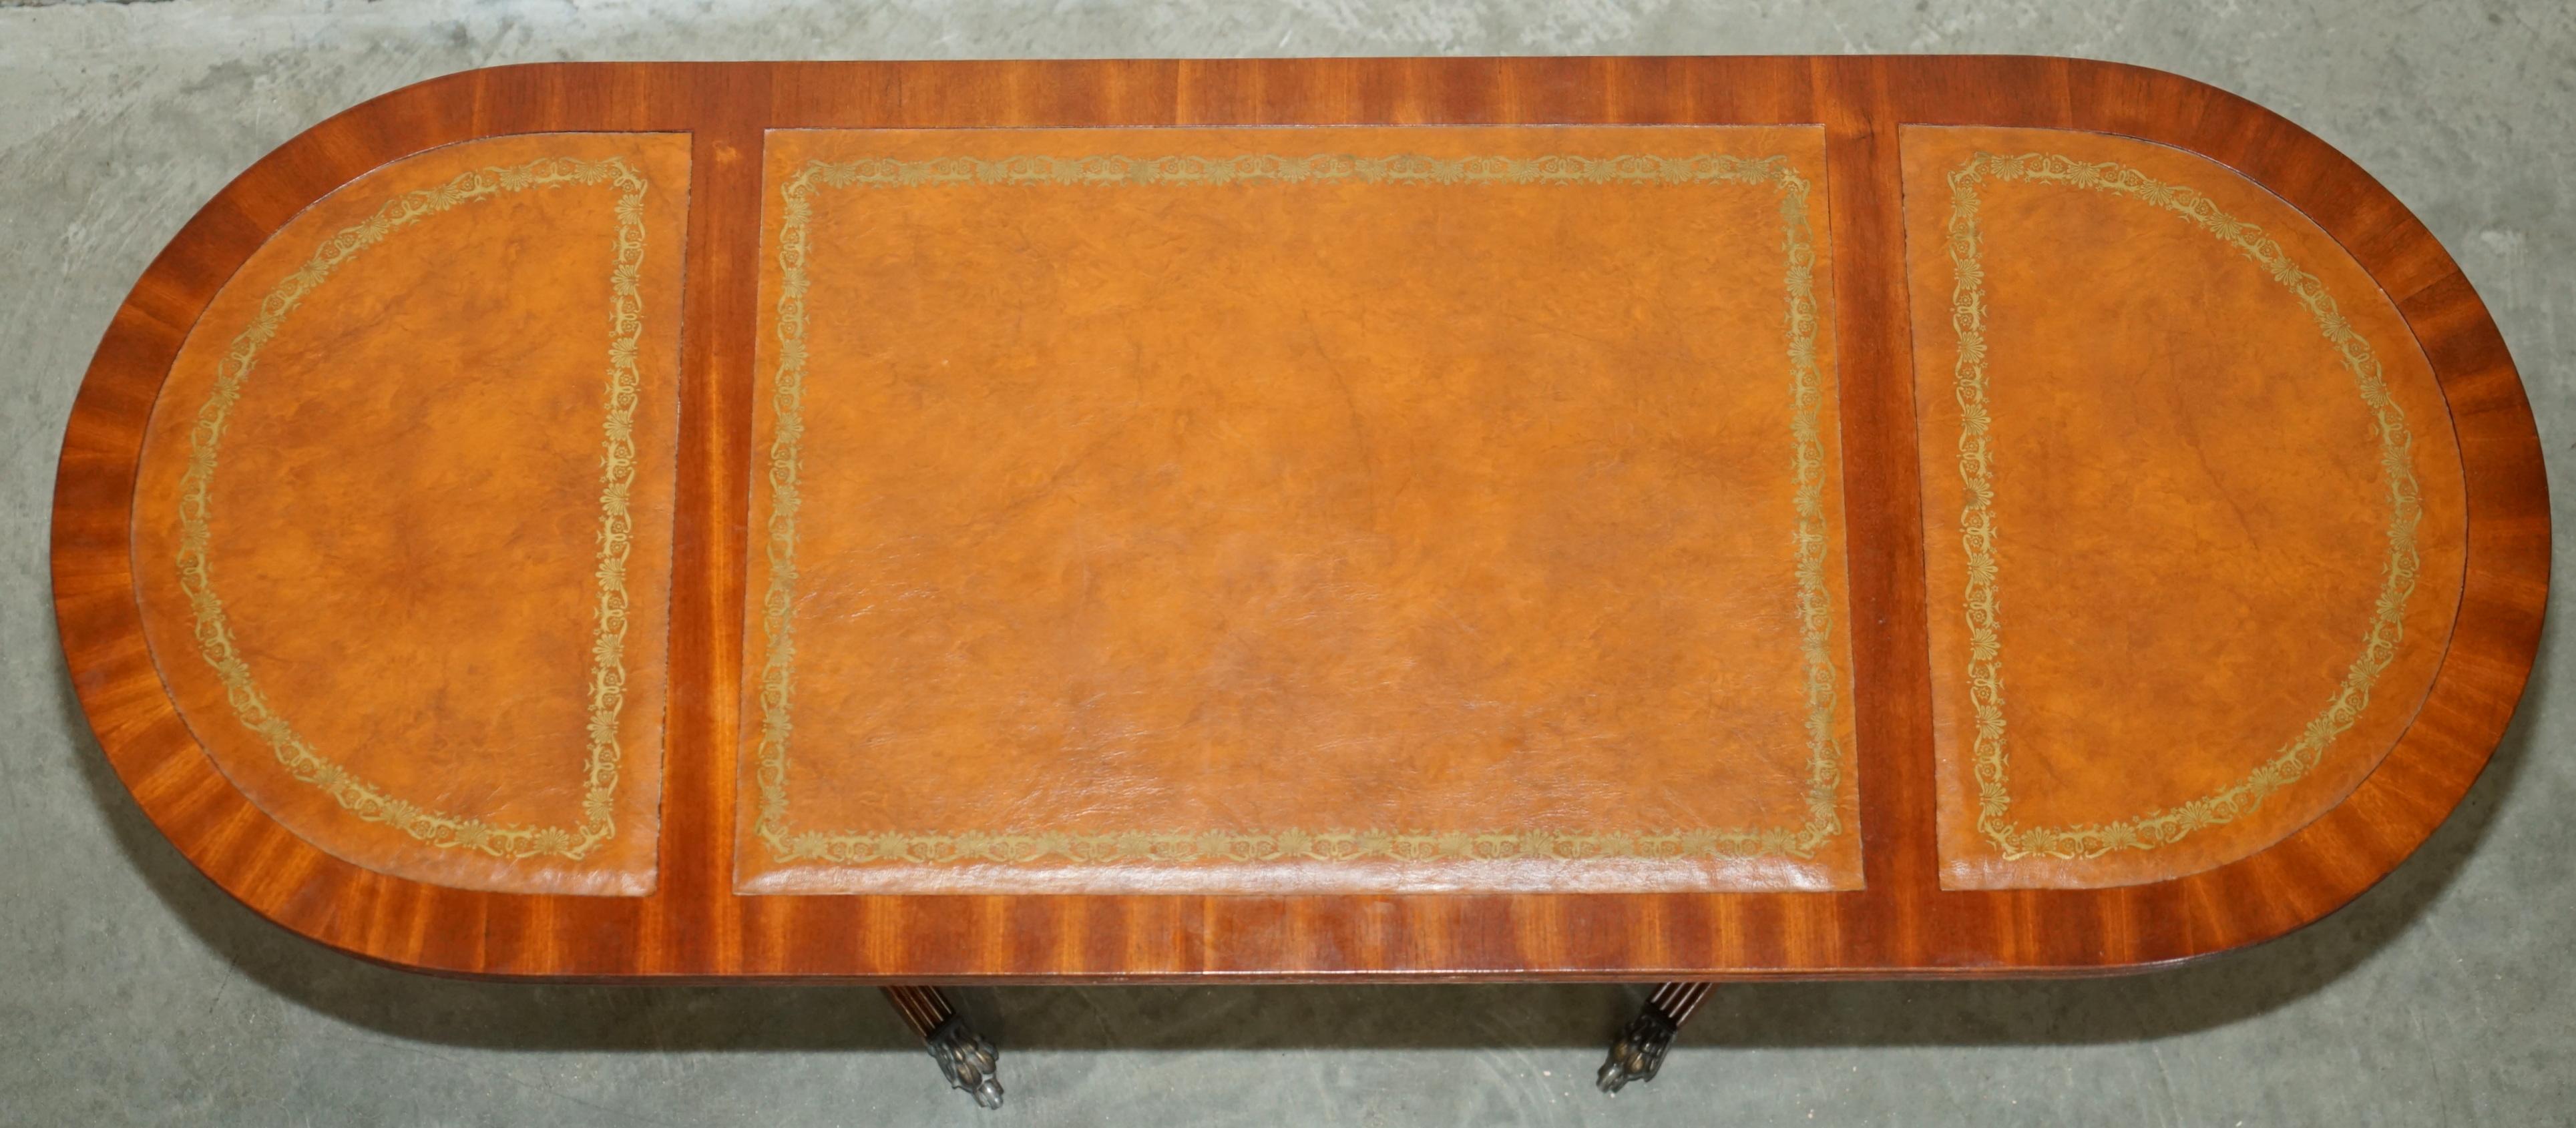 ViNTAGE HANDDYED AND AGED BROWN LEATHER OVAL COFFEE-TABLE MIT LION CASTORS im Angebot 10